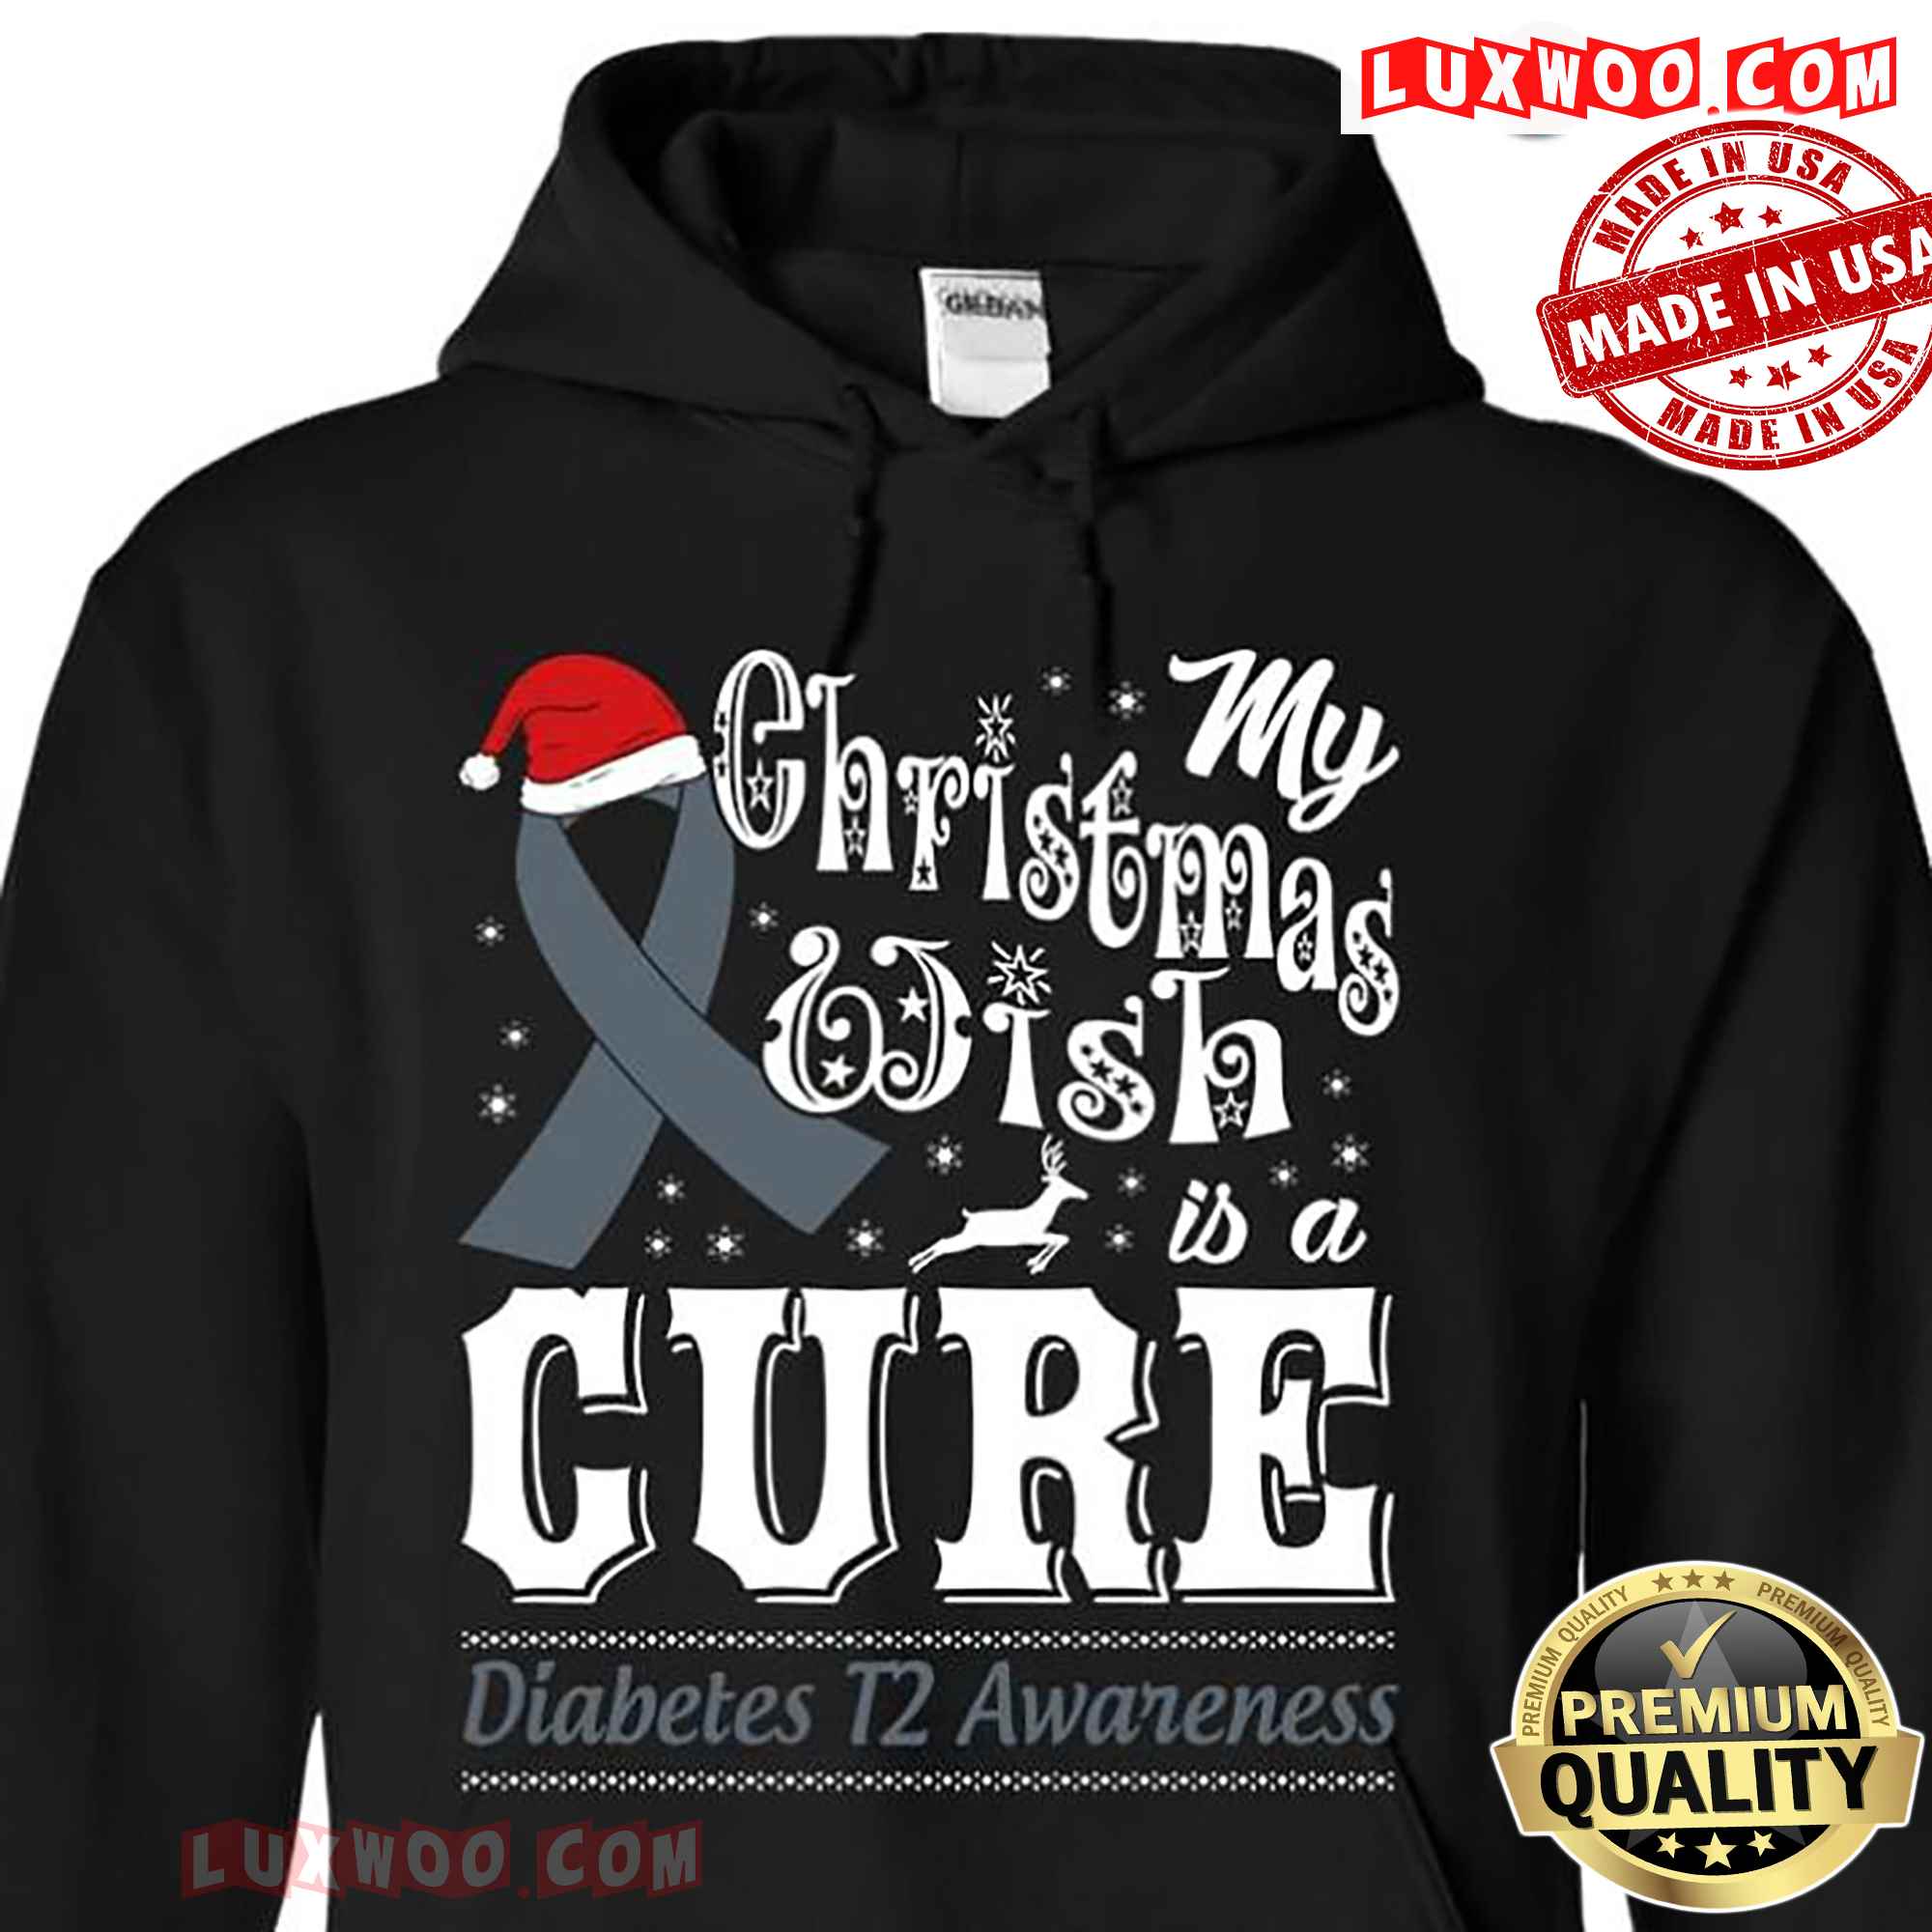 My Christmas Wish Is A Cure Diabetes T2 Awareness